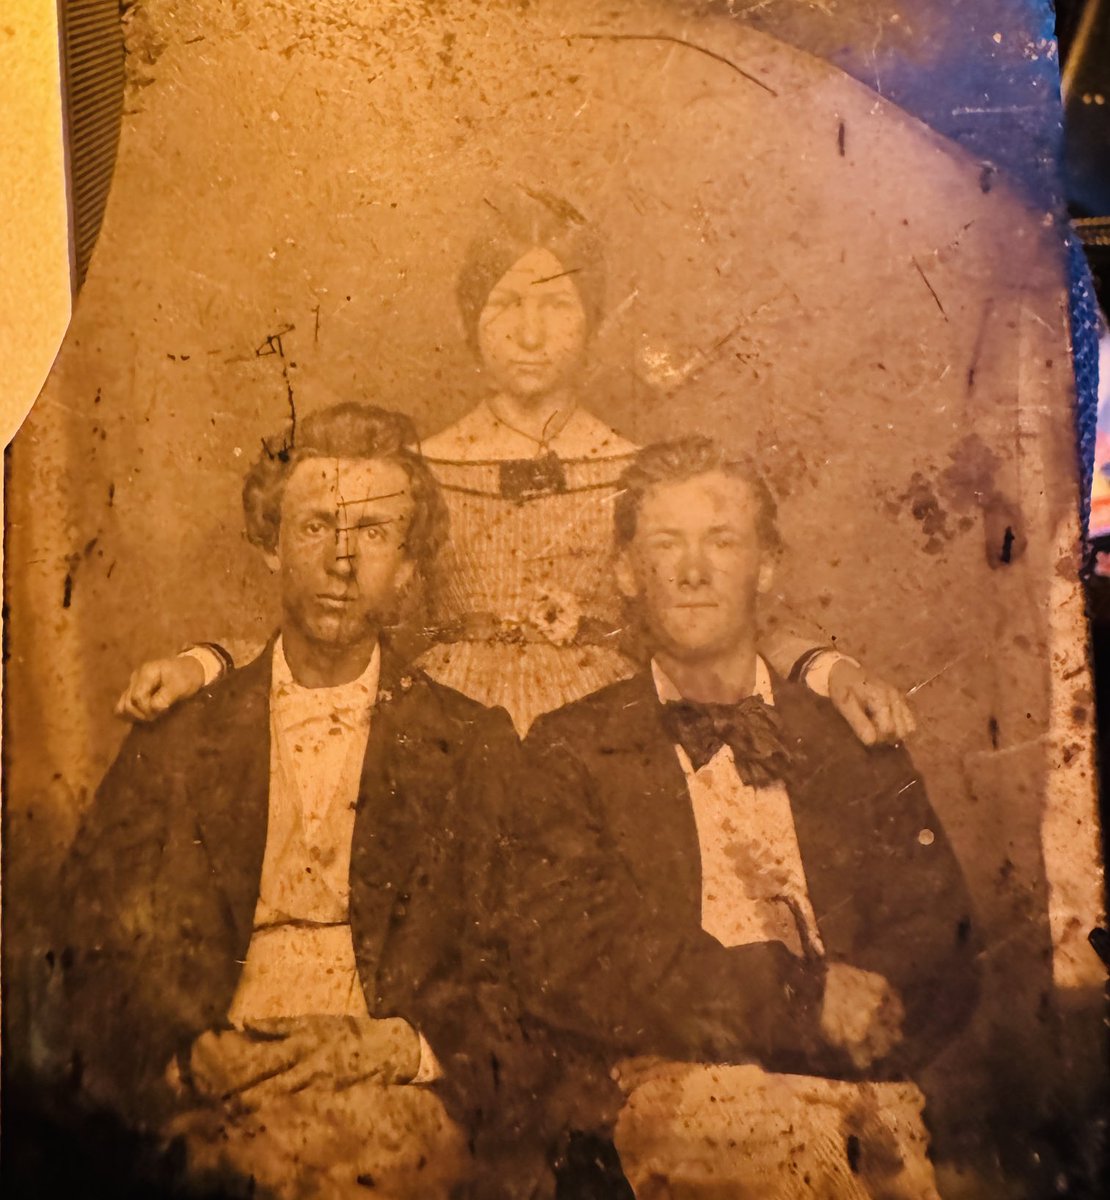 Picked up this daguerreotype today in a bundle of photos for $5. The young gentlemen look oddly familiar. Certainly looks like it could be civil war or older but I’m not sure. Any know anybody that looks at these sort of things?